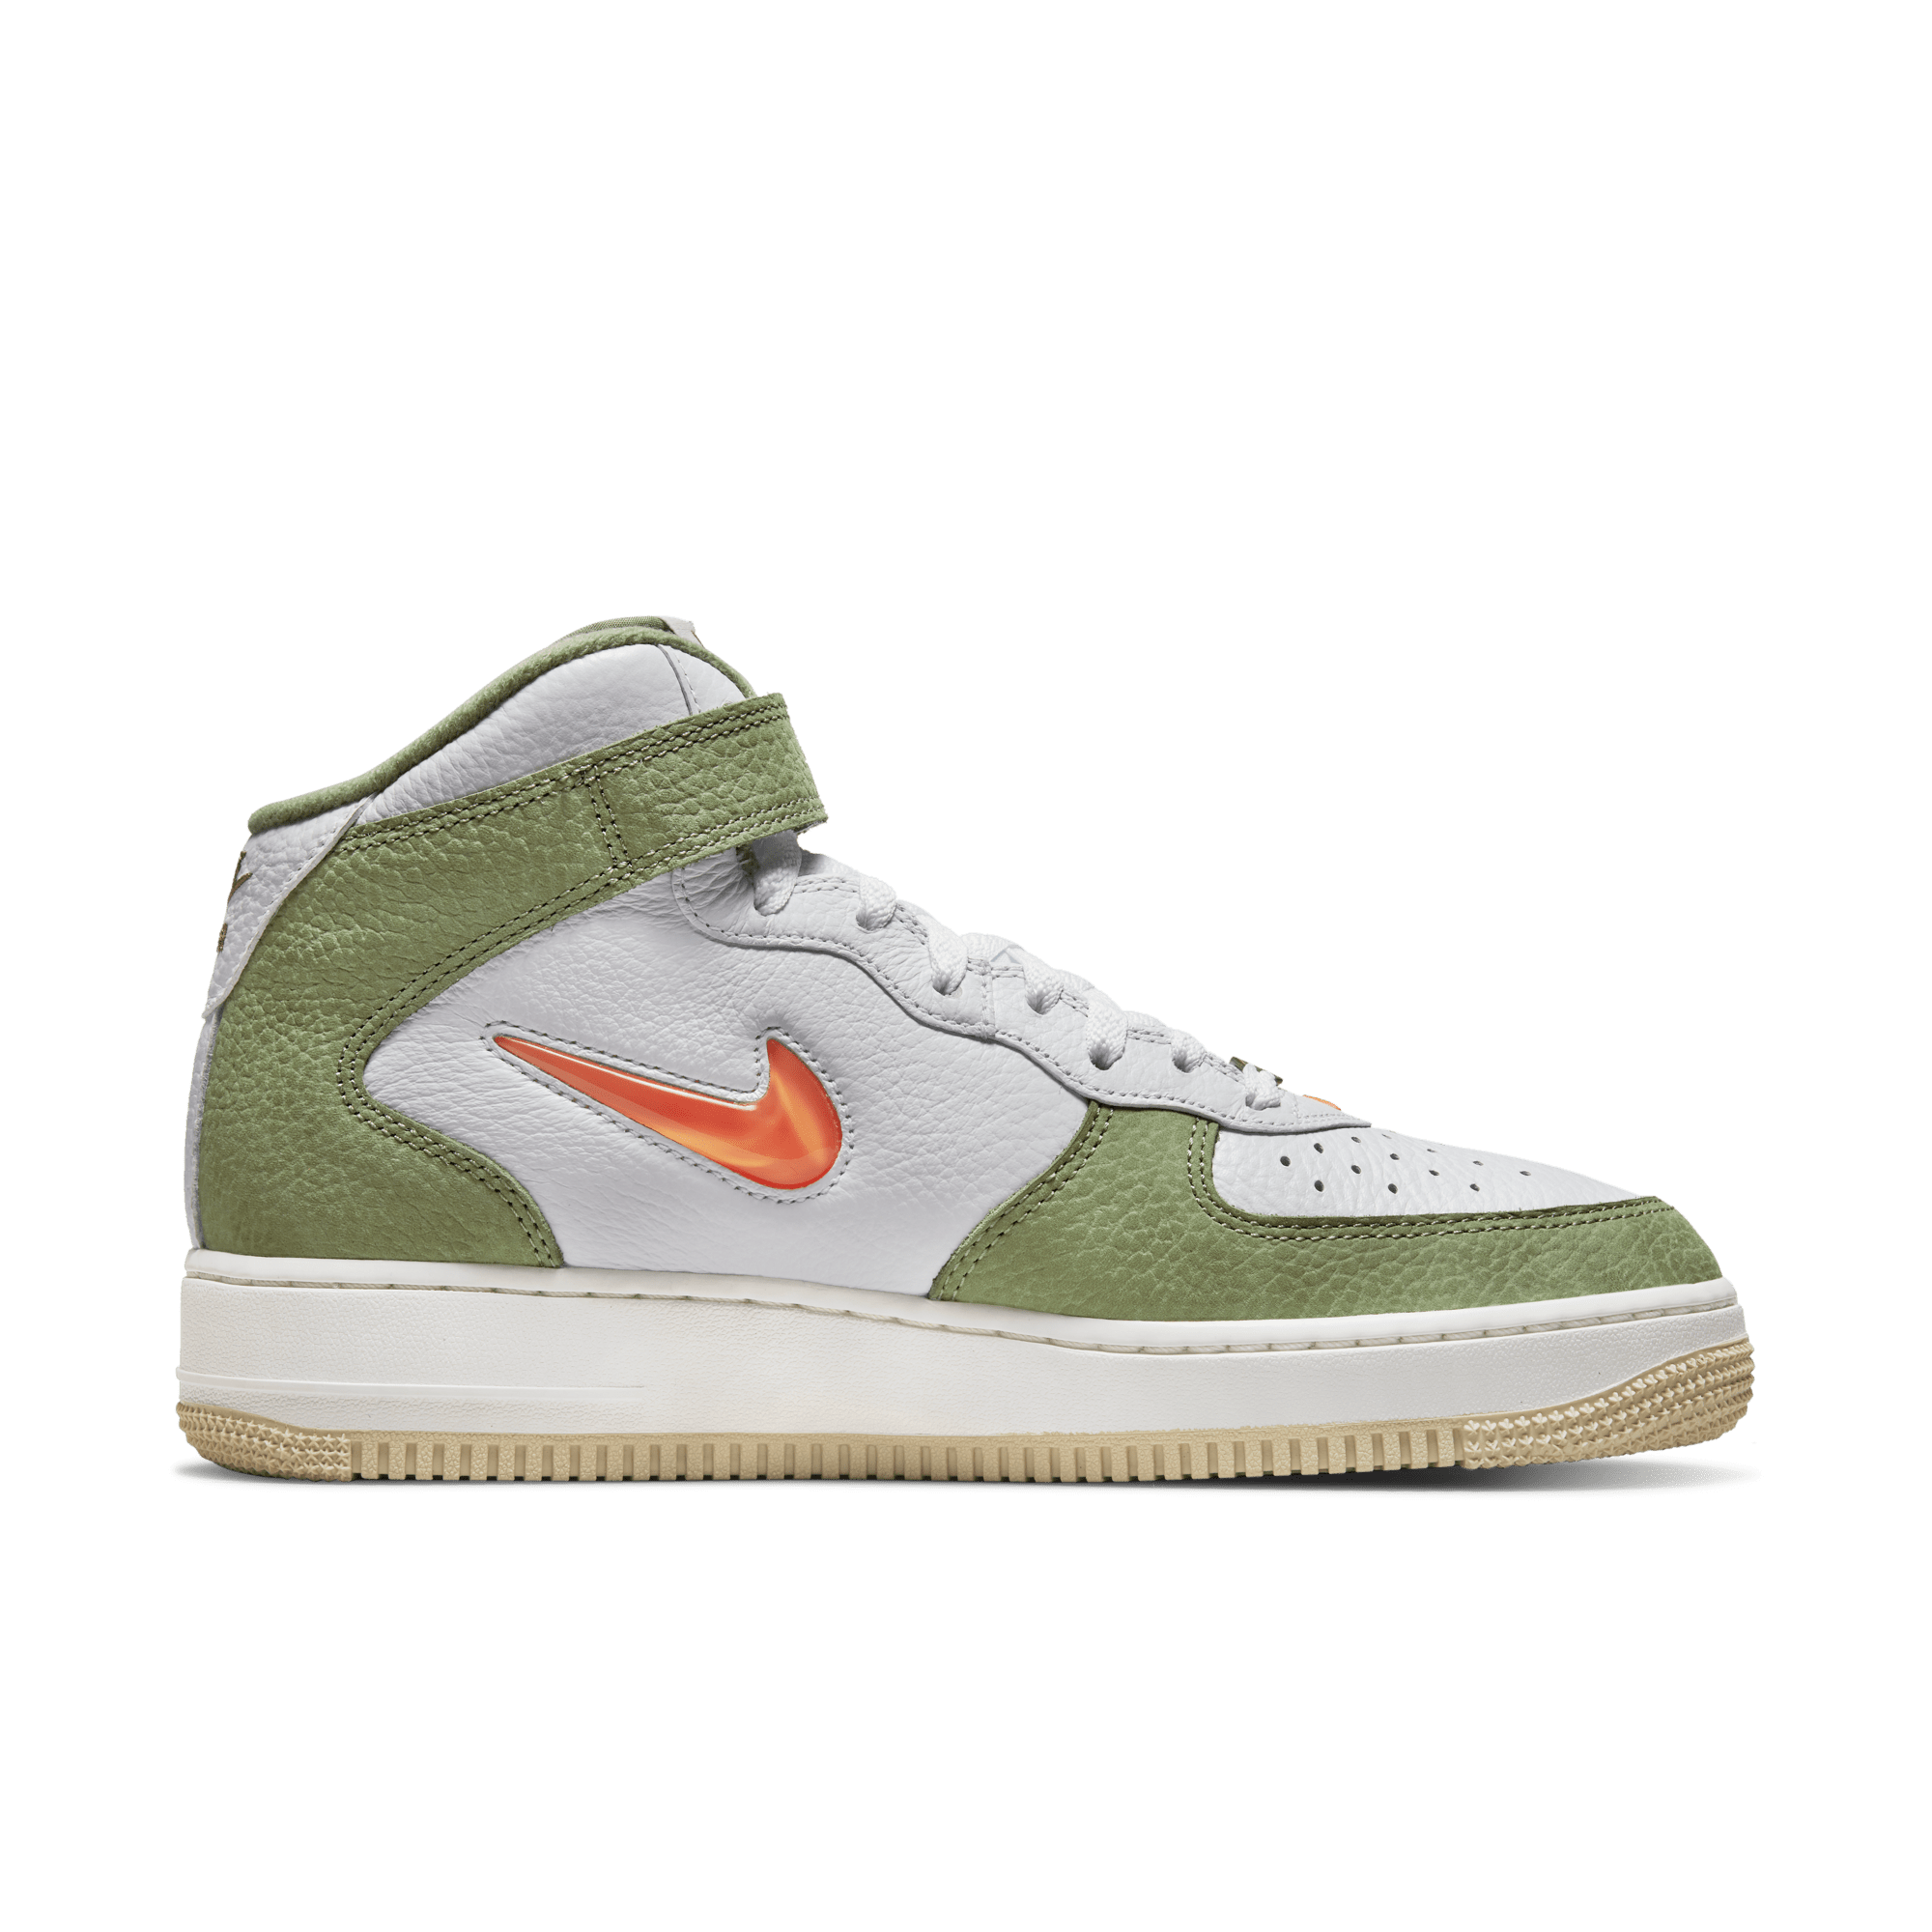 Nike Air Force 1 Low Jewel Color Of The Month Orange White, Review, Sizing